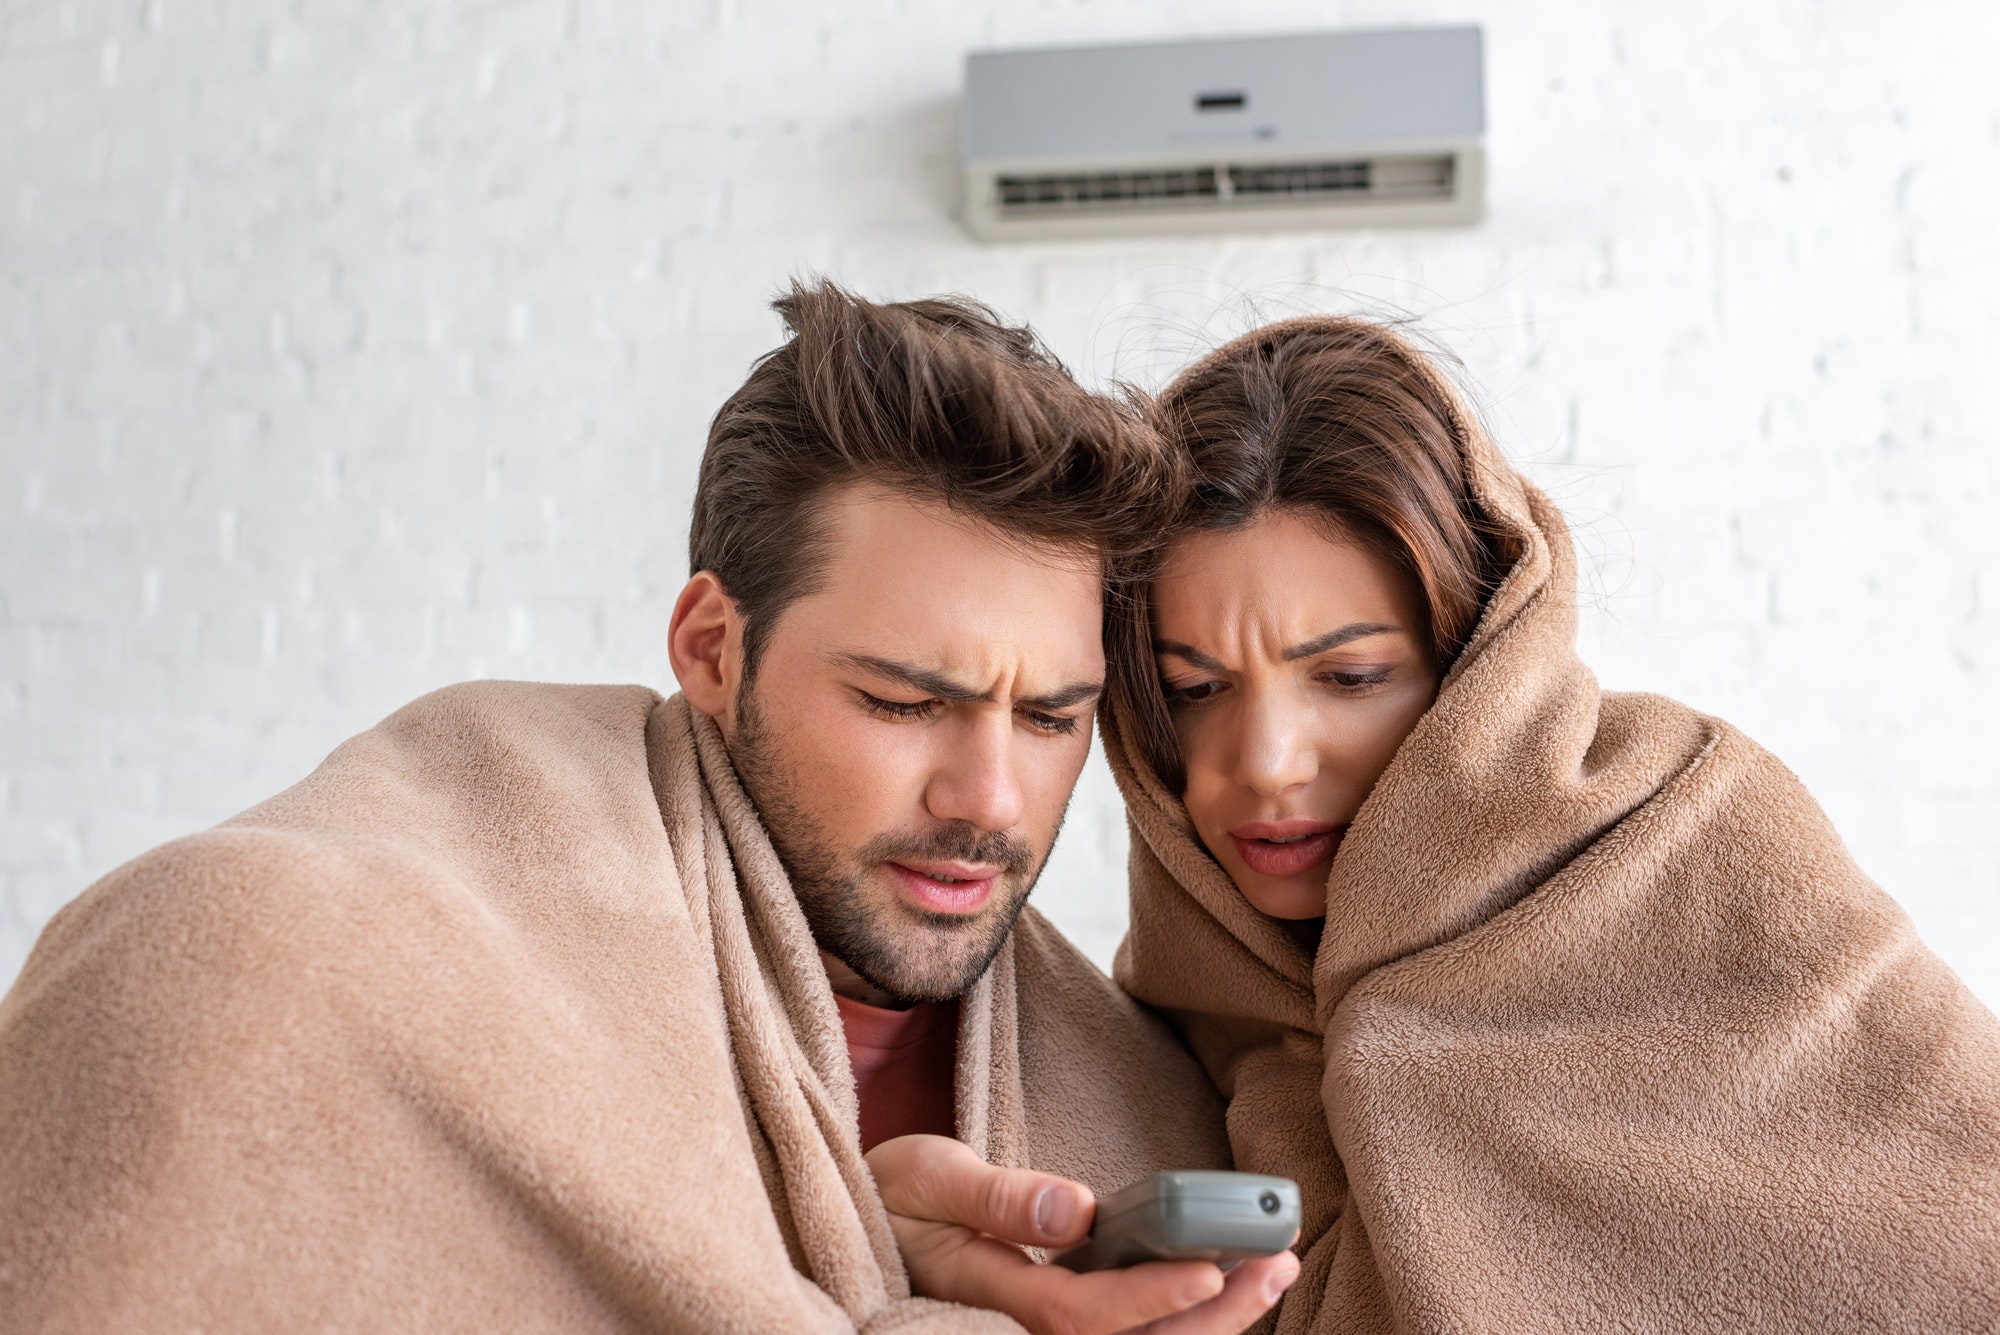 Man and Woman Feeling Cold Due to HVAC System Malfunction